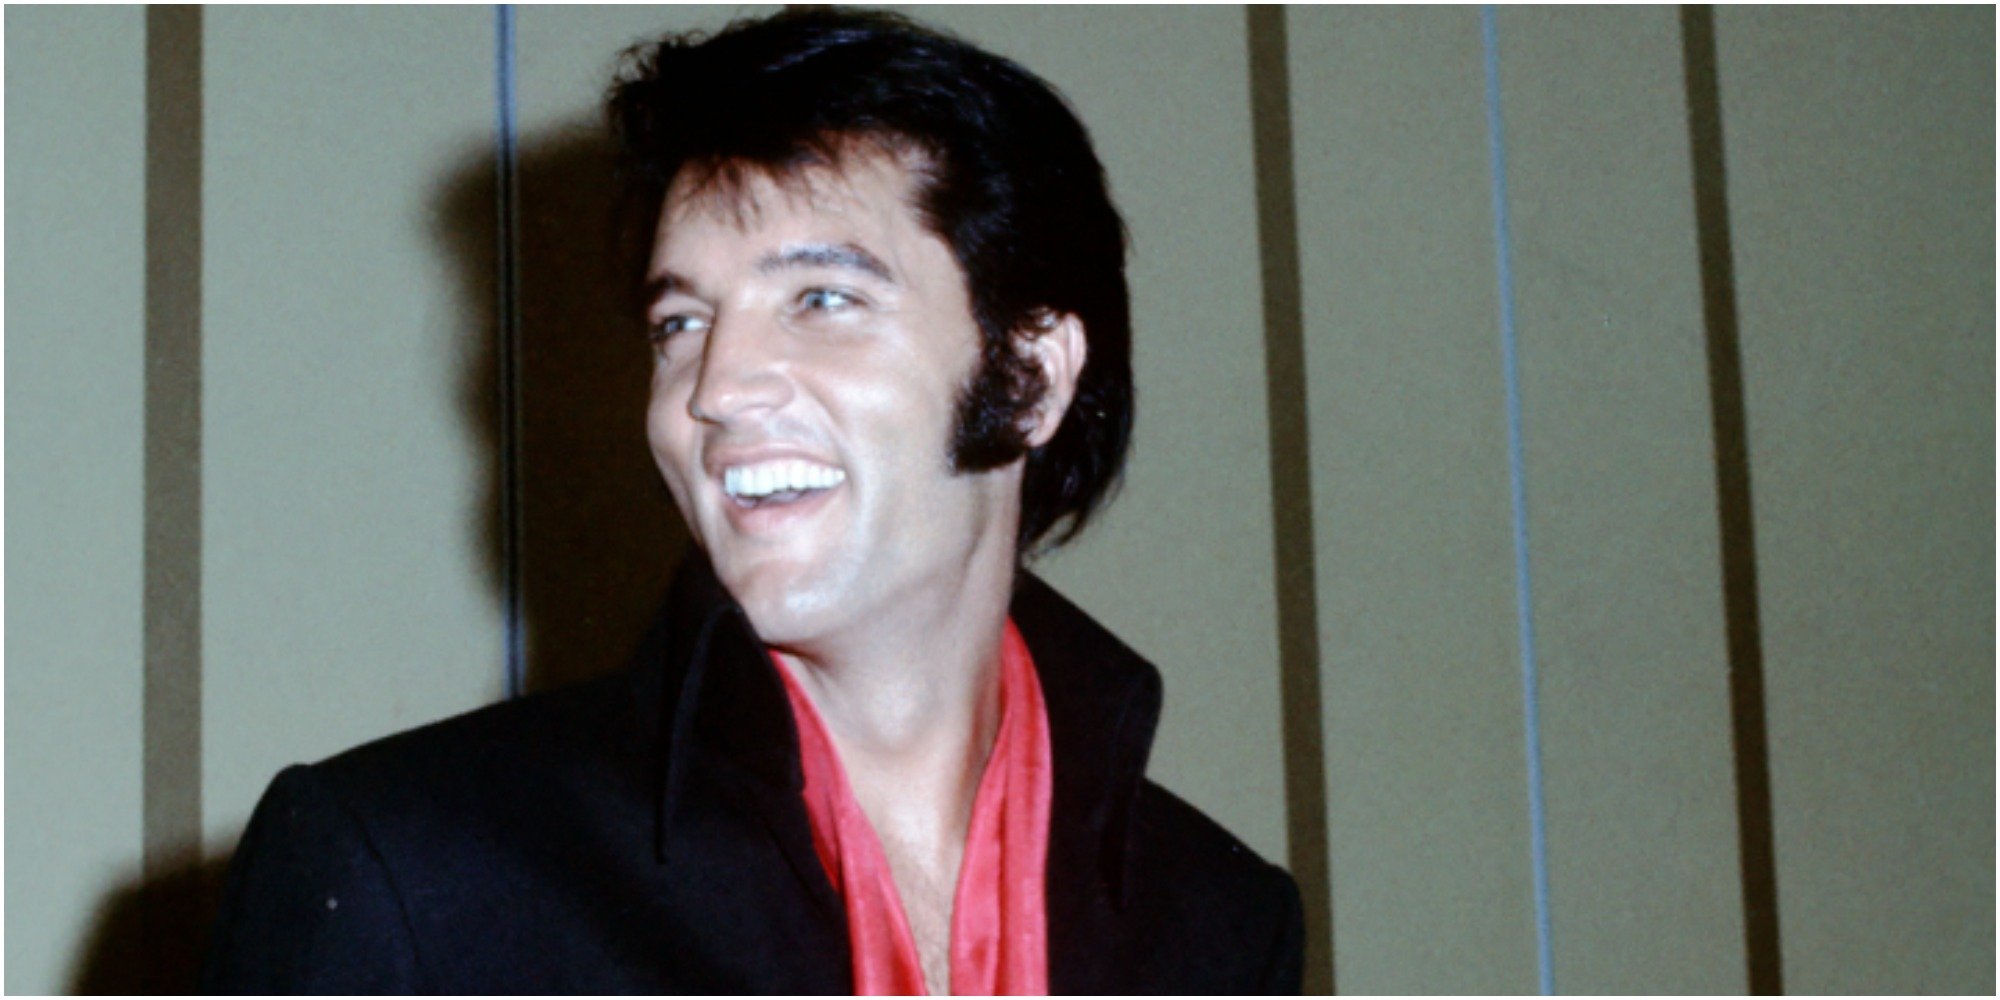 Elvis Presley: 'In the Ghetto' Songwriter Wished the King of Rock and Roll Sang 1 Part of This Iconic Tune Differently